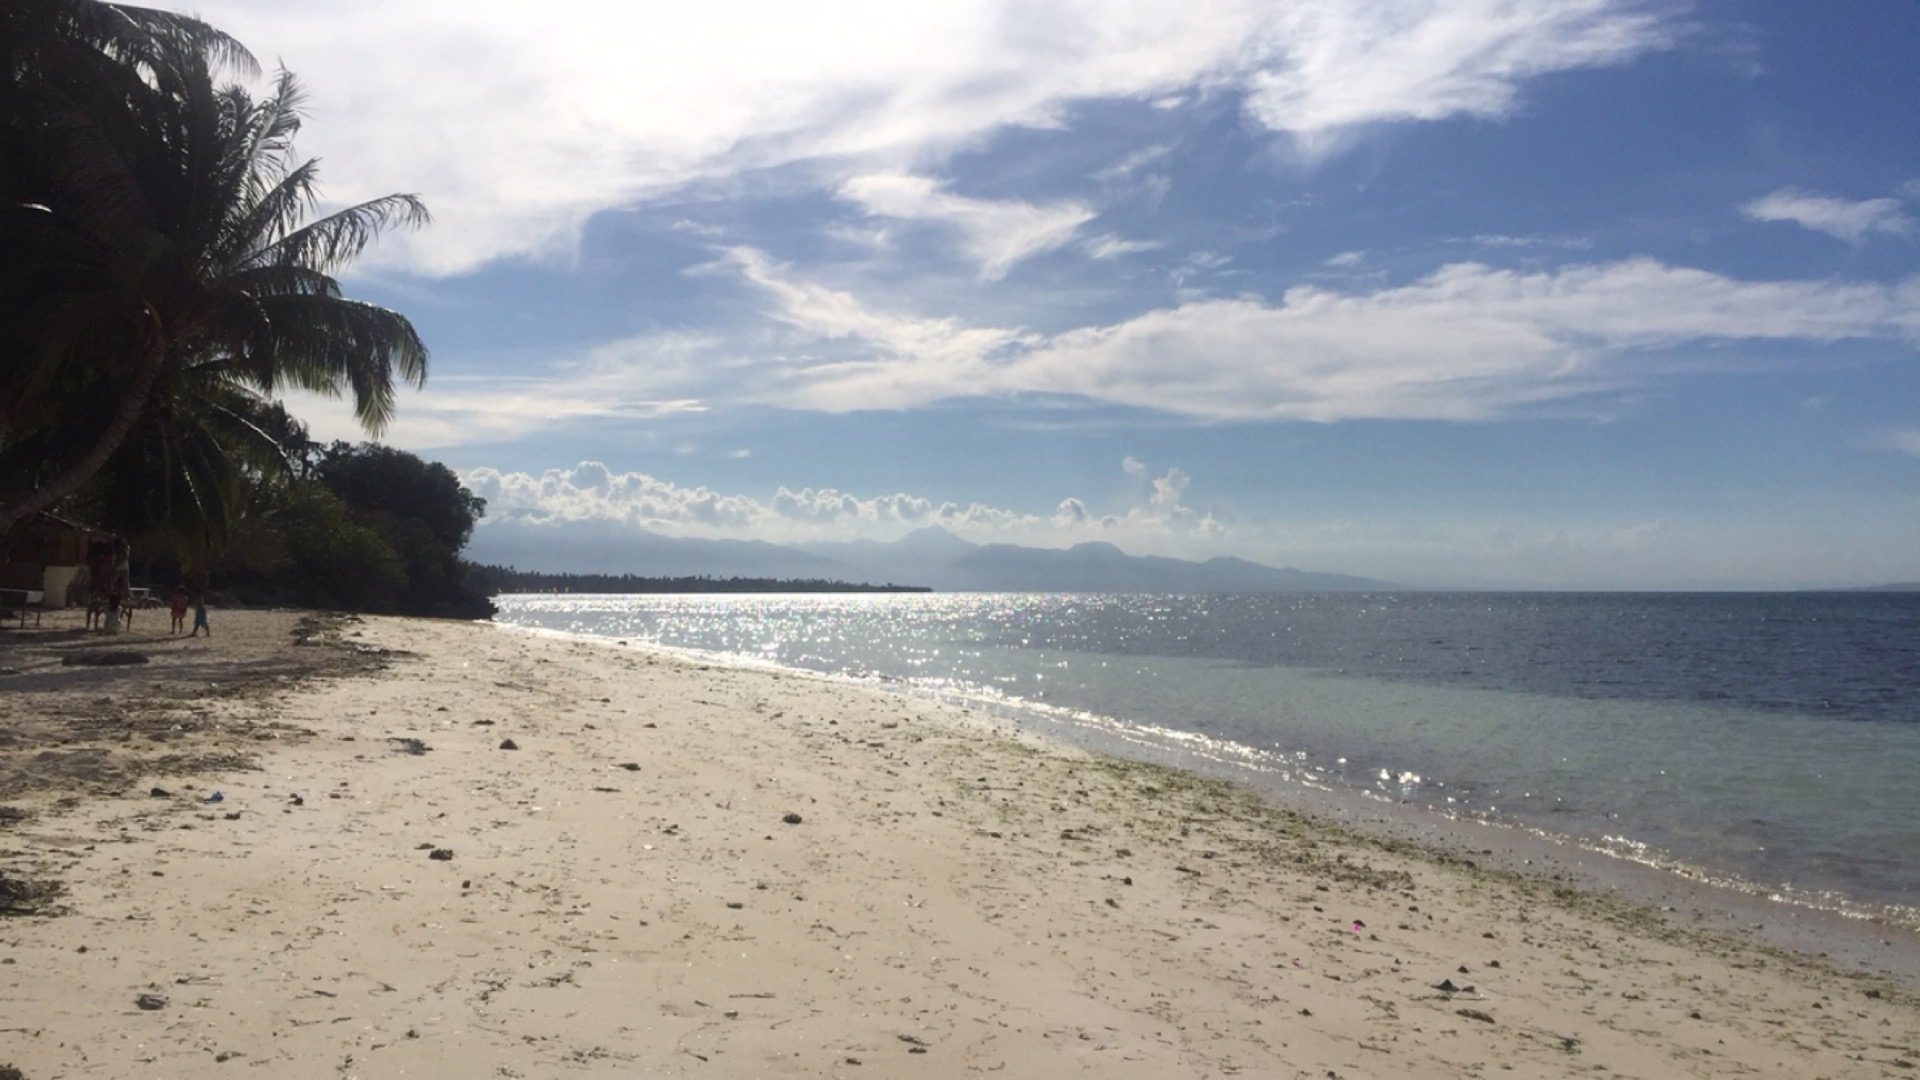 Beach in Siquijor, Philippines. Friendly locals and Siquijor